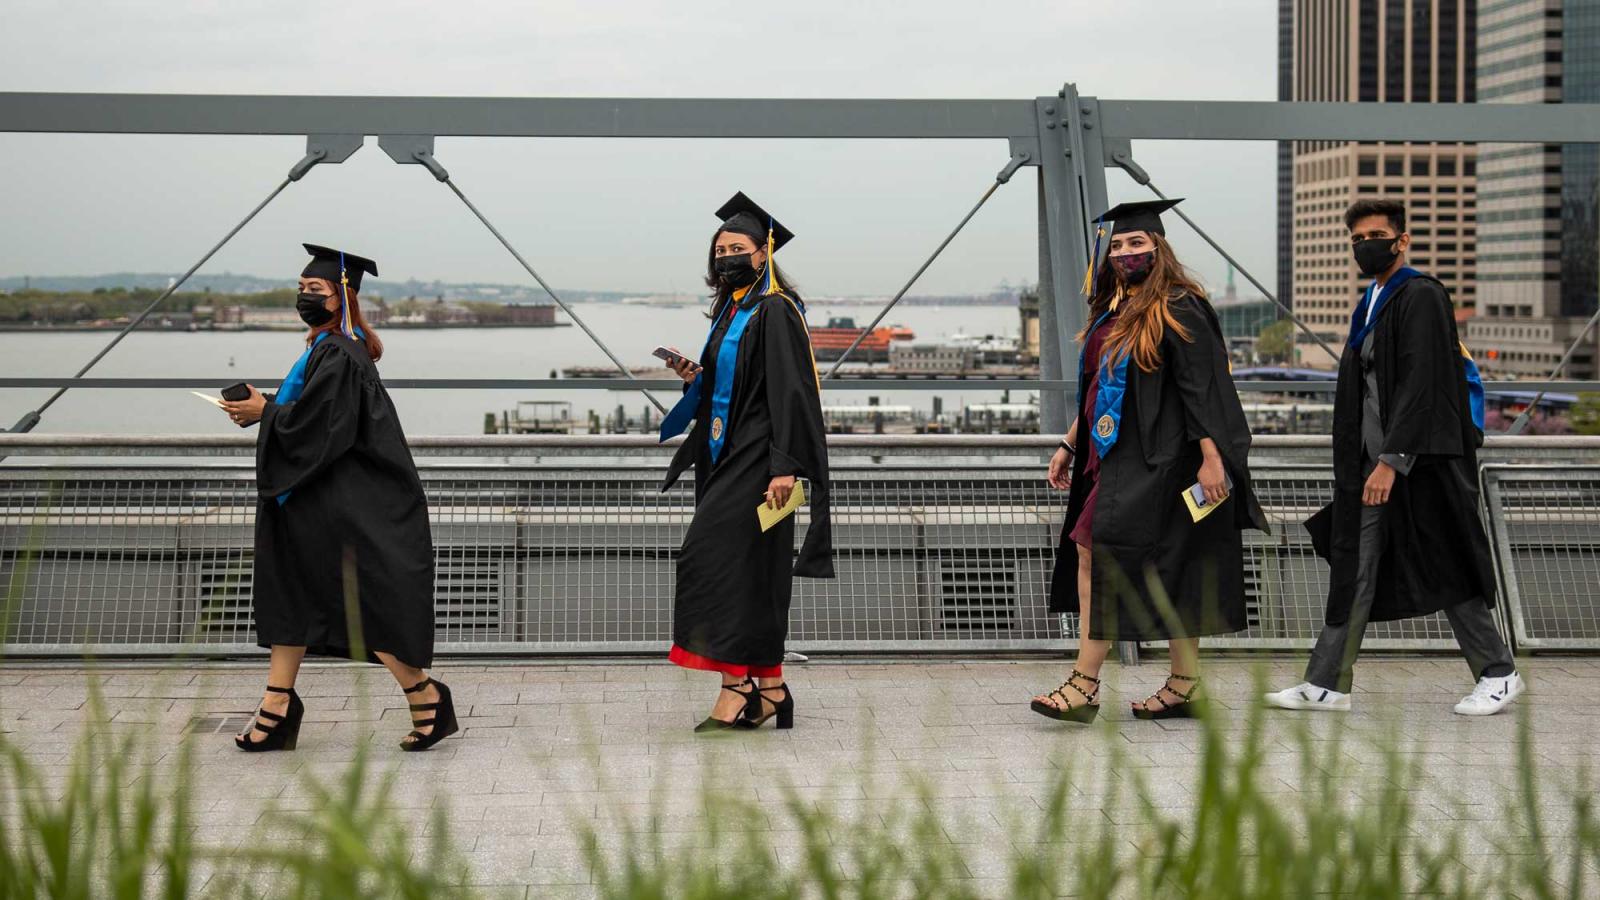 The New York Times featured Pace University’s inperson commencement